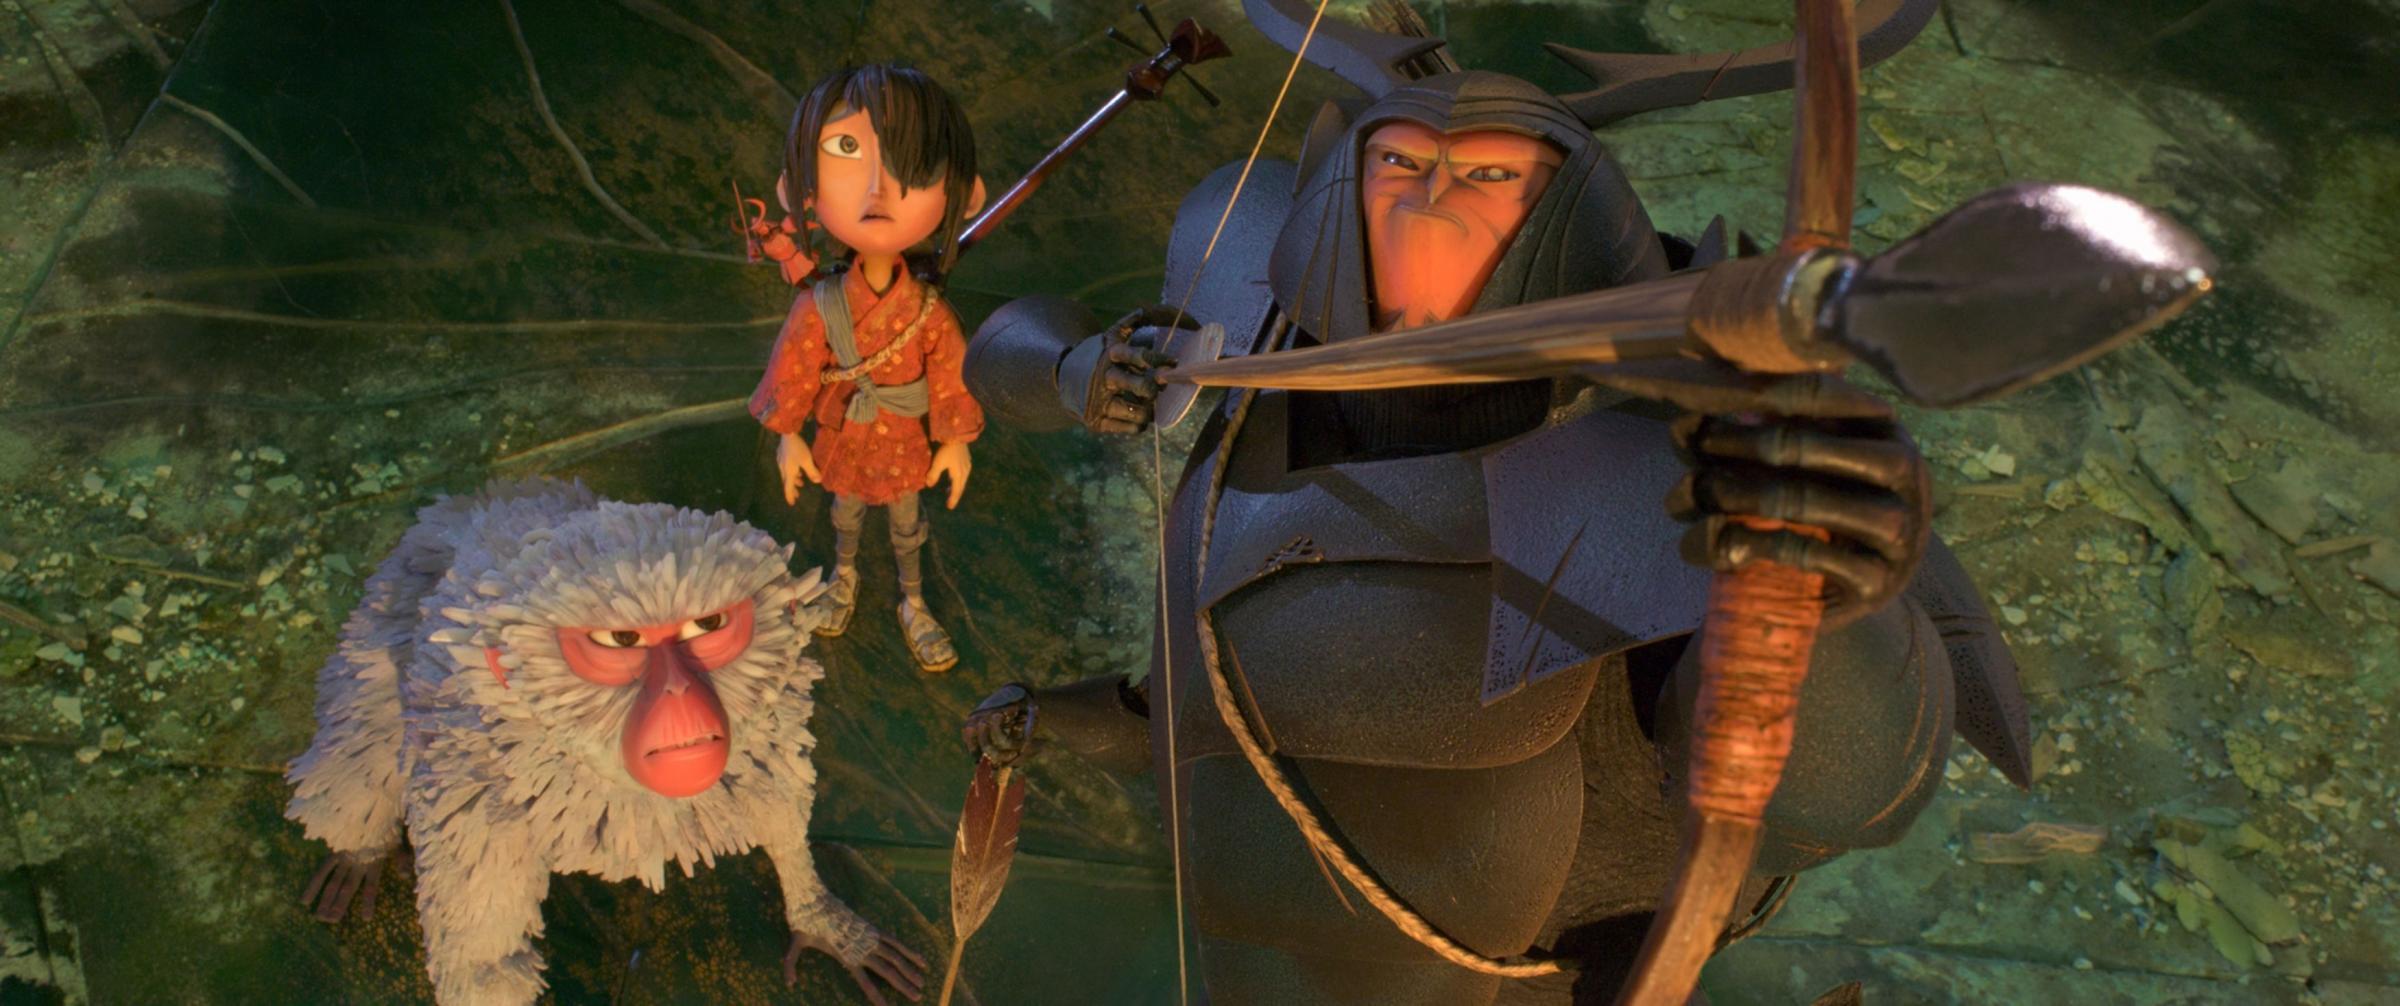 Charlize Theron and Ralph Fiennes provide the voices in this visually sumptuous and meticulously crafted animated ... - Bridport and Lyme Regis News